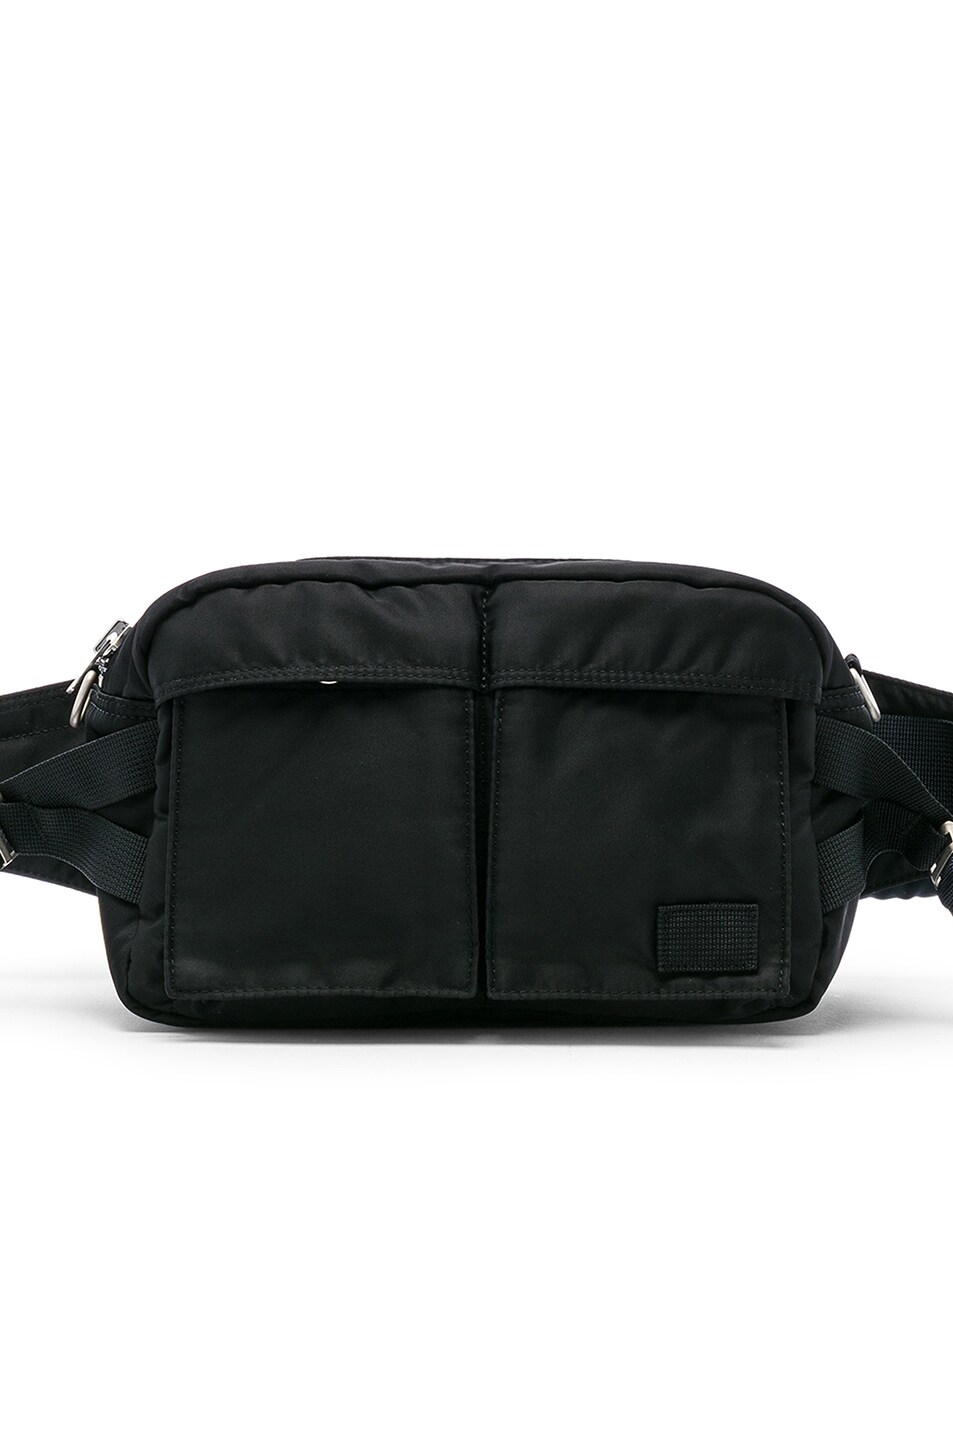 Image 1 of Sacai Porter Fanny Pack in Black & Navy